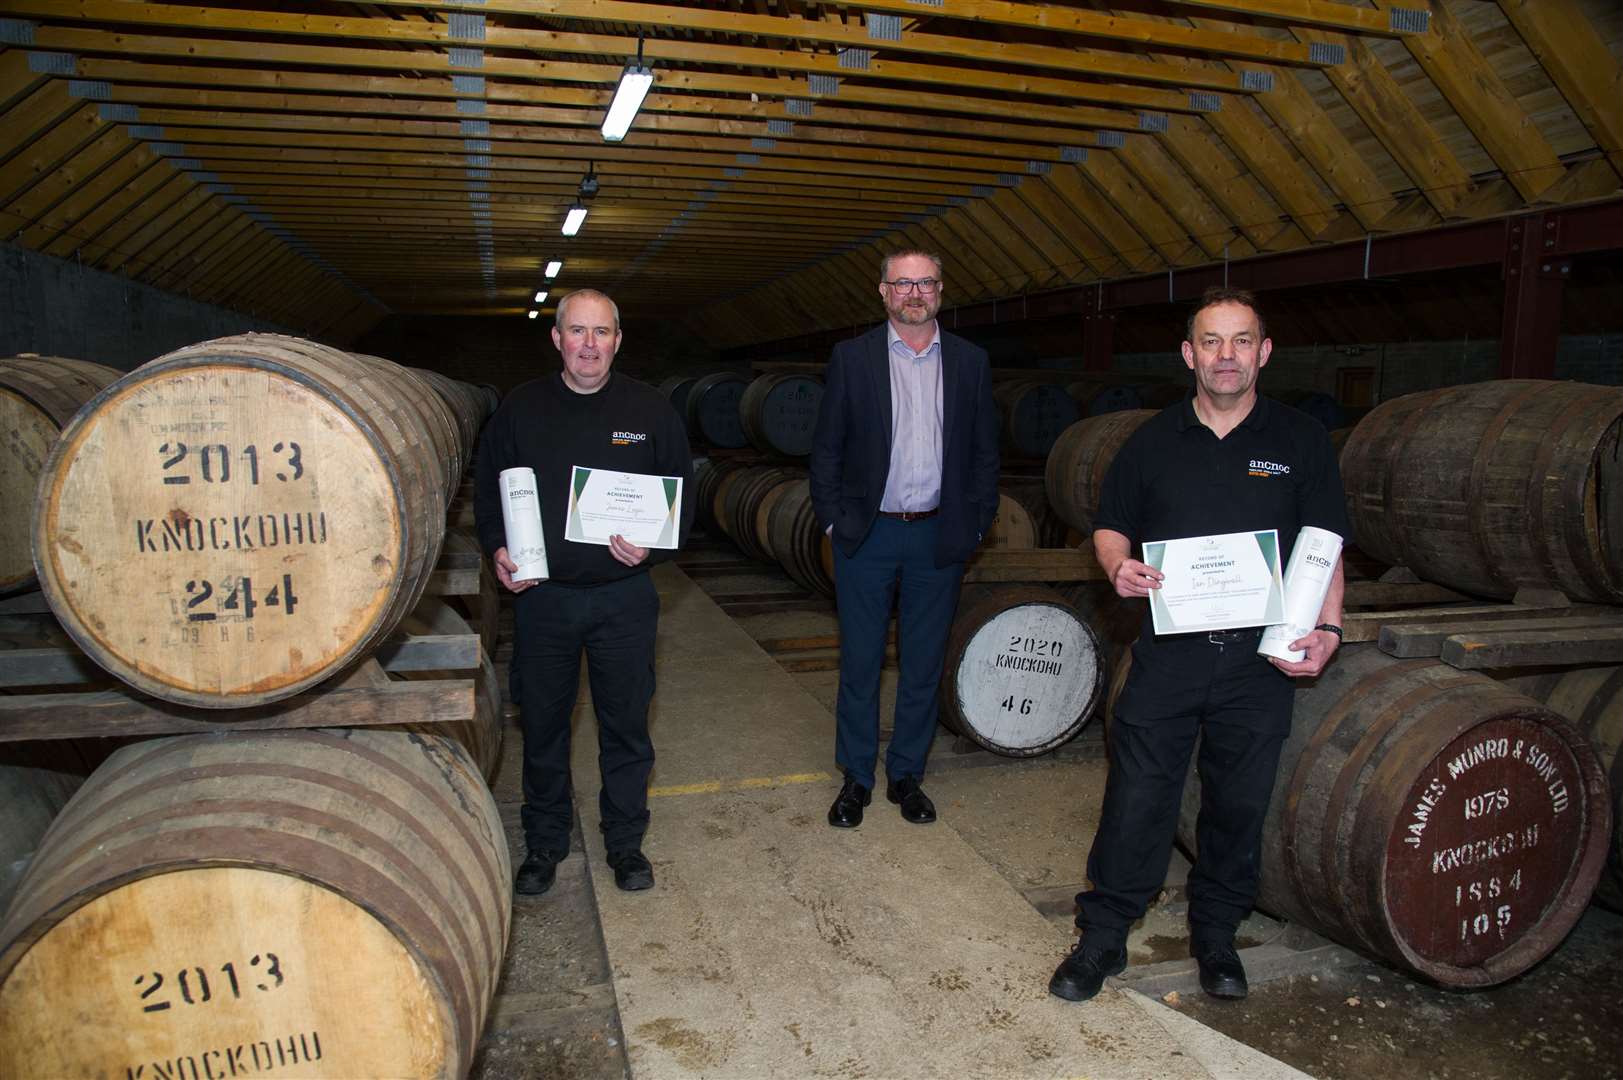 James Logie, left, and Ian Dingwall who were honoured for 30 years at Knockdhu Distillery with Derek Sinclair, centre who retired as general manager. Picture: Becky Saunderson.